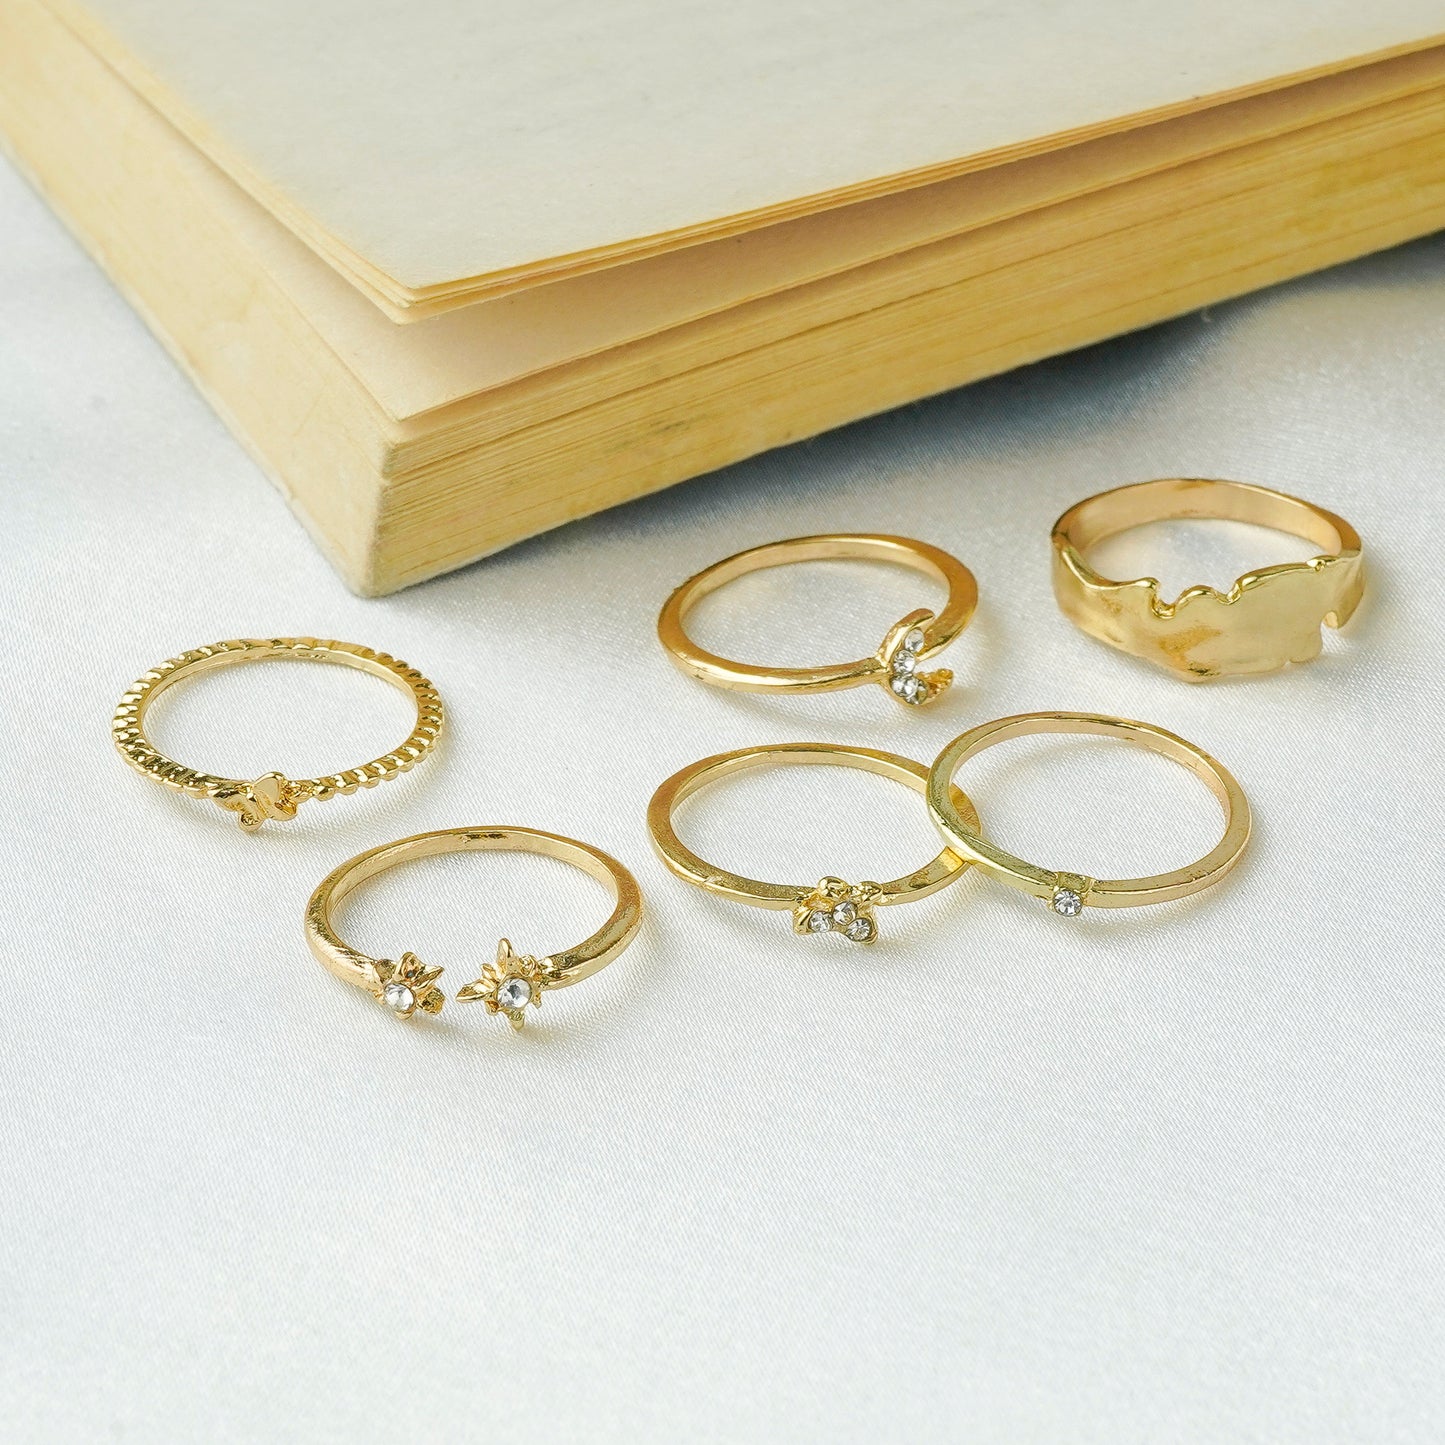 Trendy Set Ring For Fashionable Women(Code:R22)